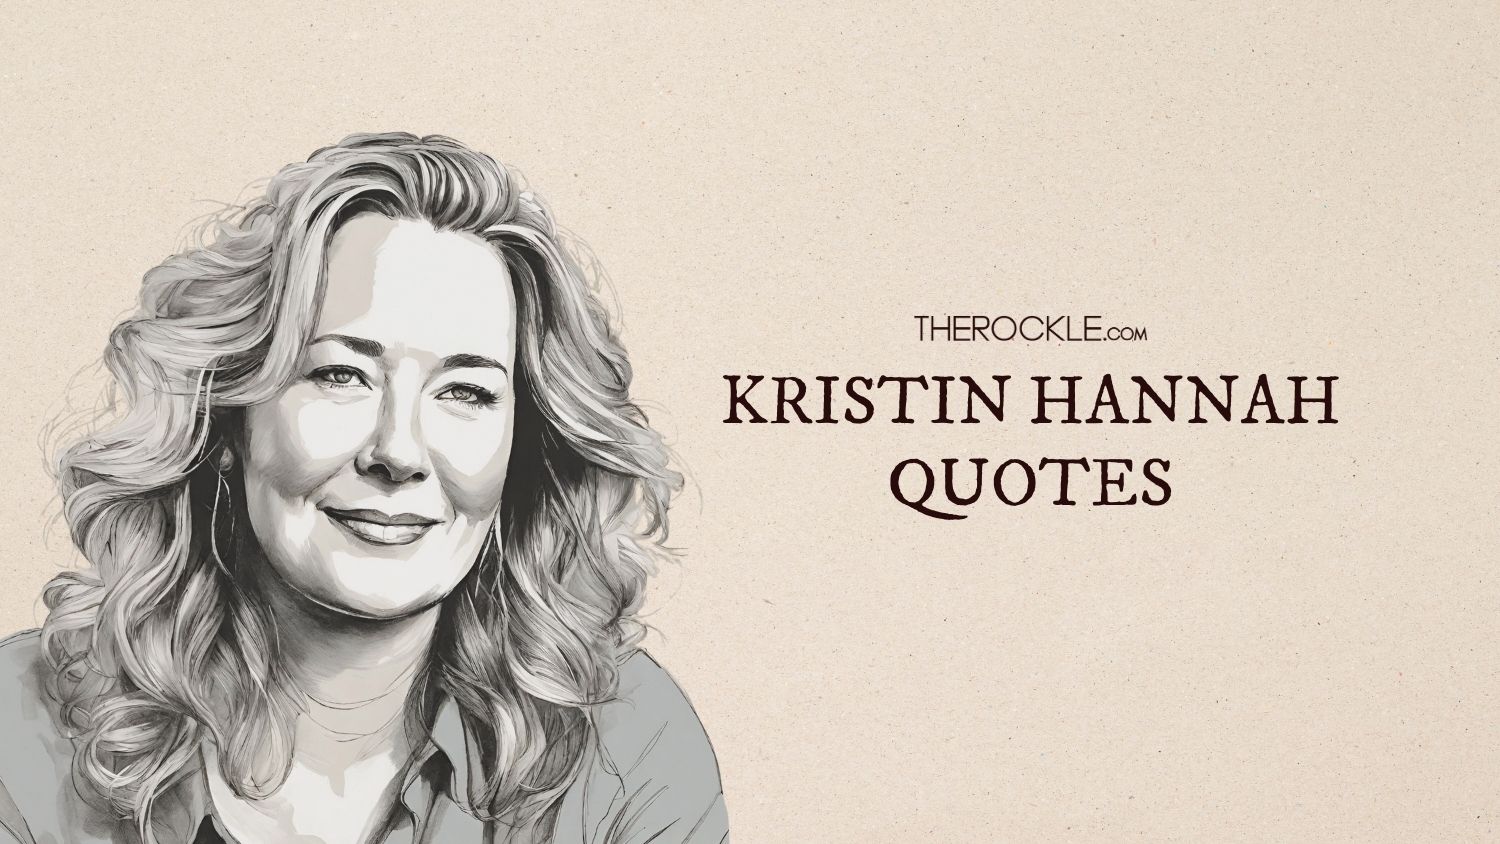 Feel All the Feels with These 10 Beautiful Kristin Hannah Quotes